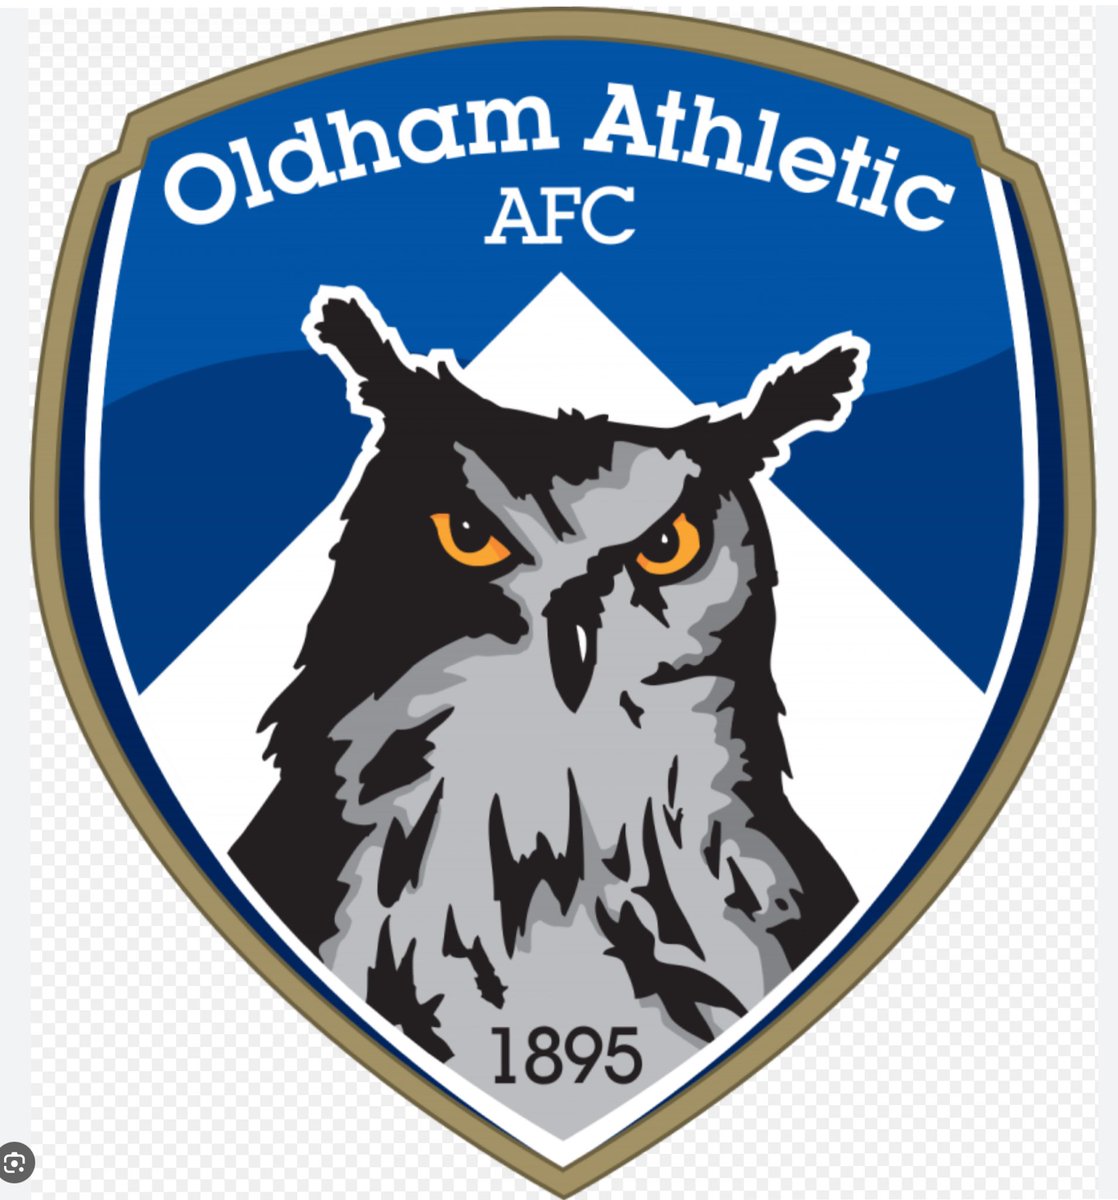 In other news: Congratulations to Oldham Athletic who are officially unbeaten for two weeks, it’s now their best run of the season #oafc #NonLeague #latics